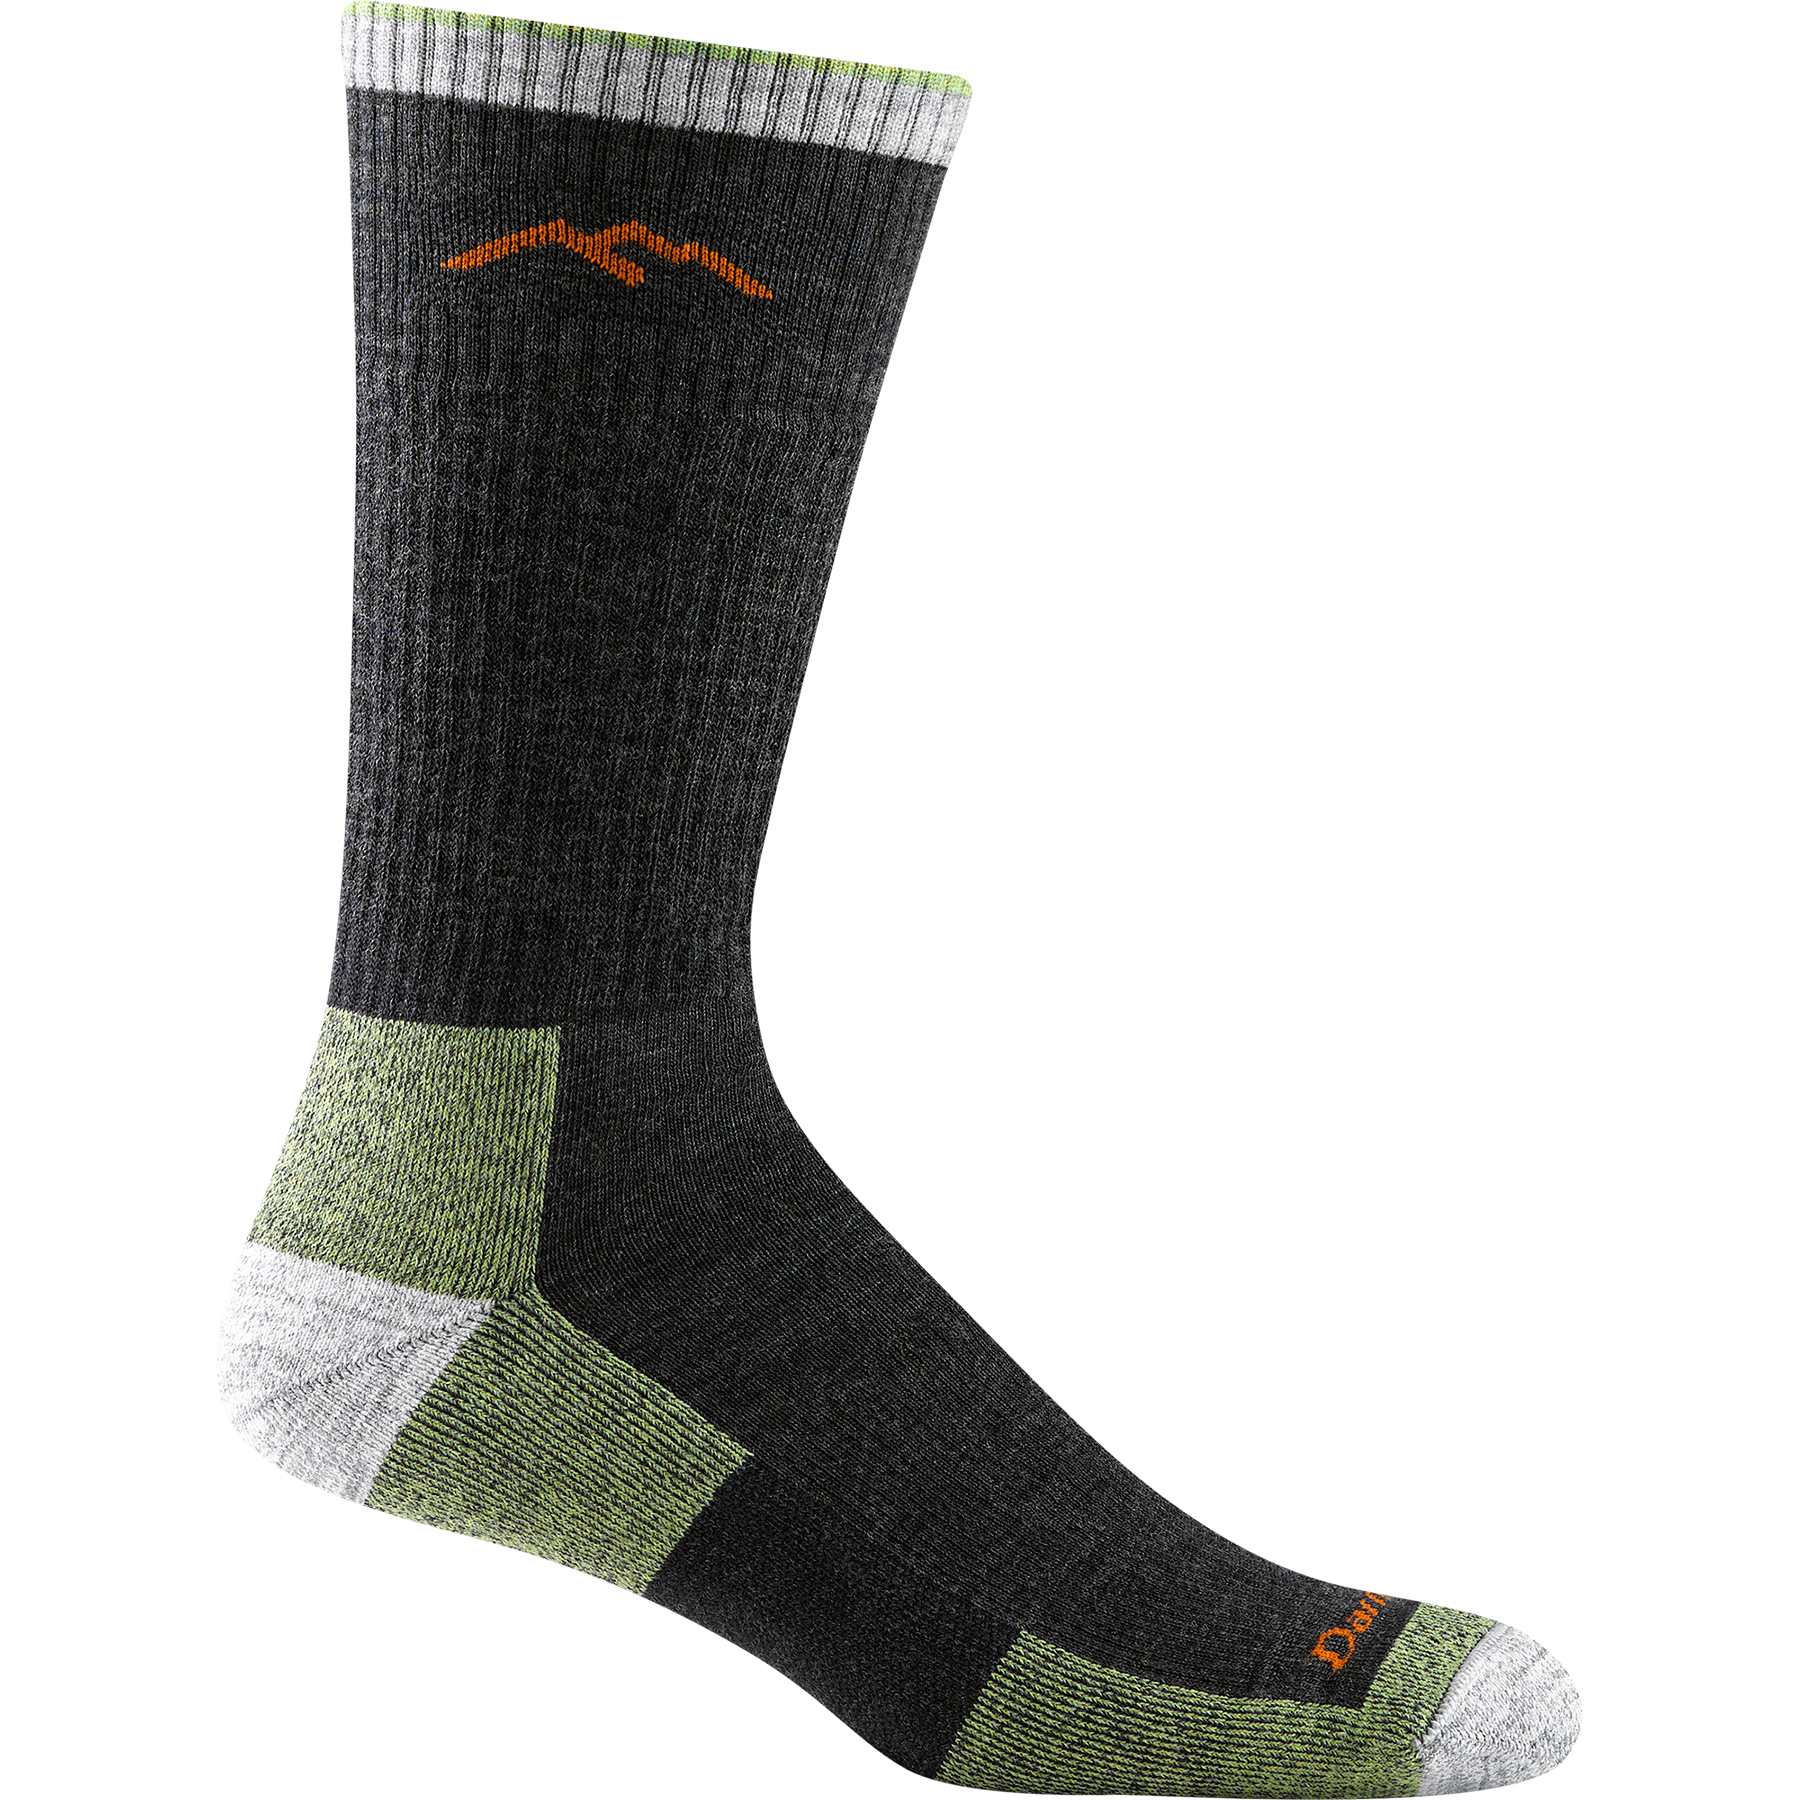 Darn tough lime and charcoal sock with orange mountain outline detail, white toe and heel